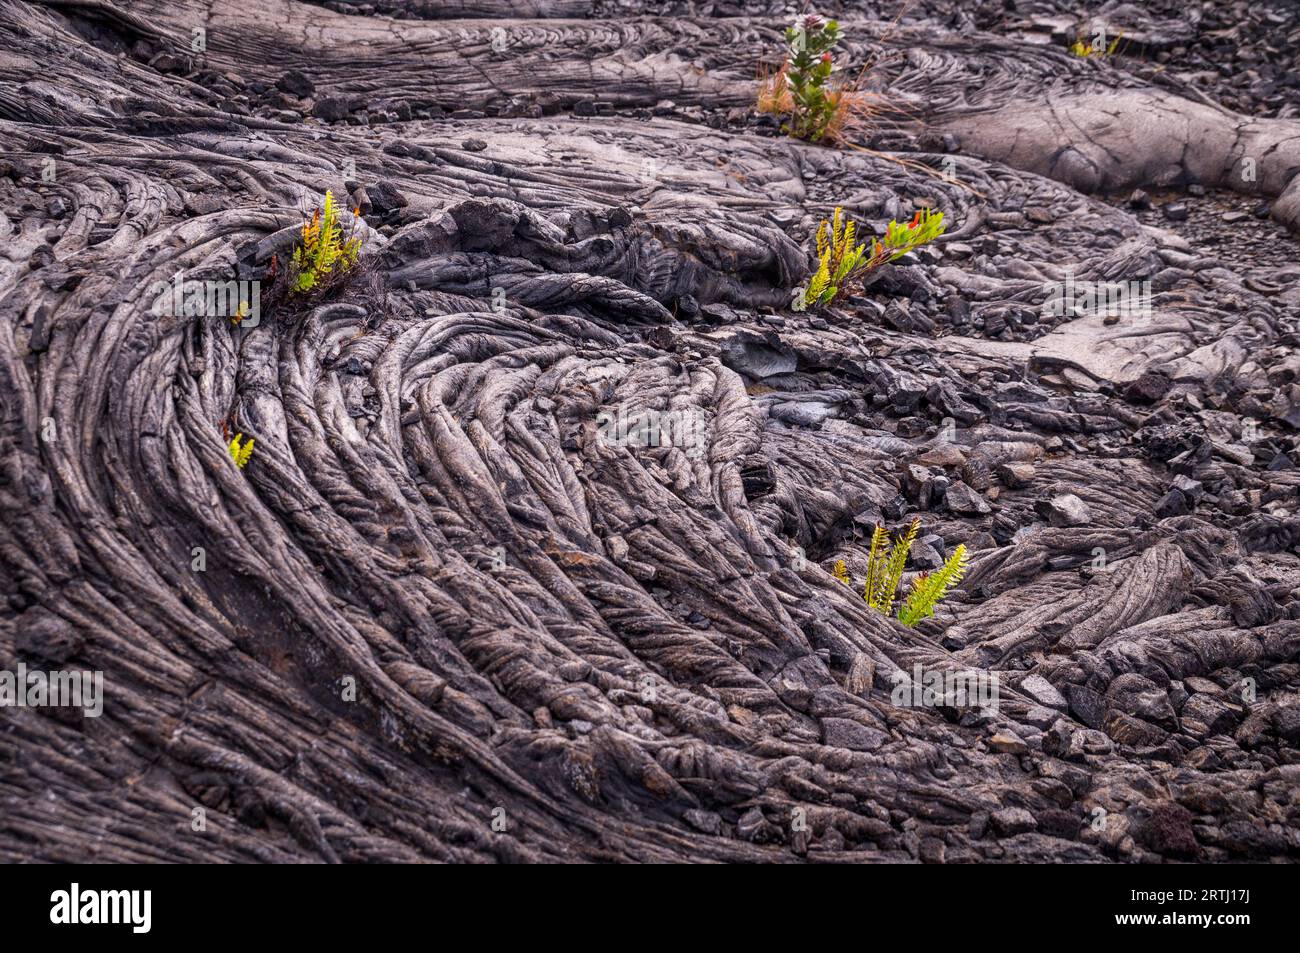 Patterns formed by a lava flow are bursting with new life as small green ferns grow in the cold lava in Volcanos National Park, Hawaii Stock Photo